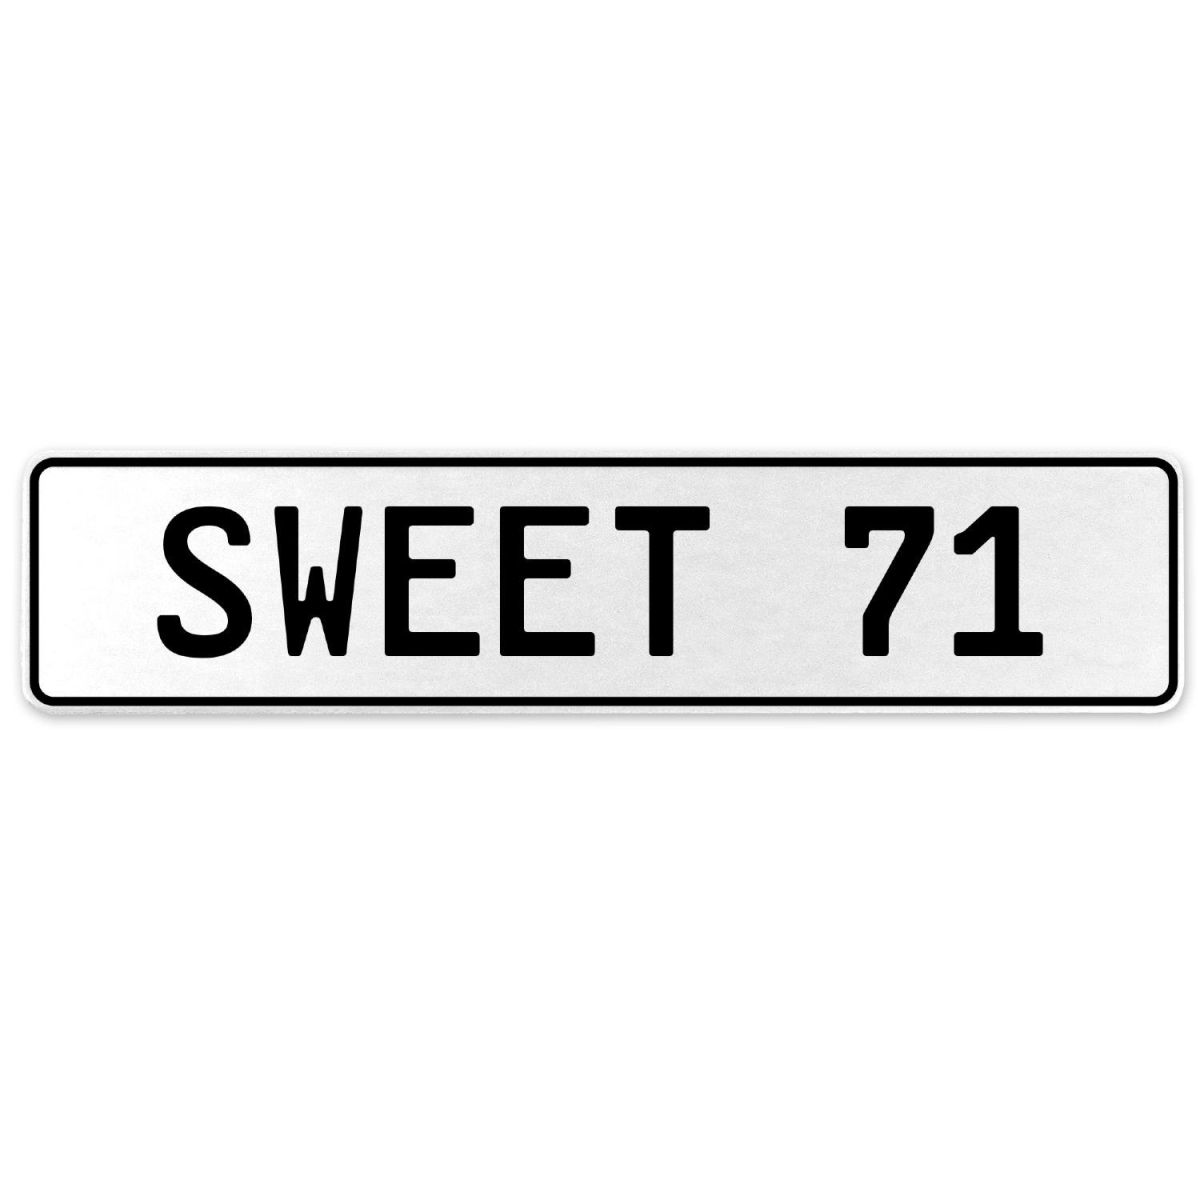 554173 Sweet 71 - White Aluminum Street Sign Mancave Euro Plate Name Door Sign Wall